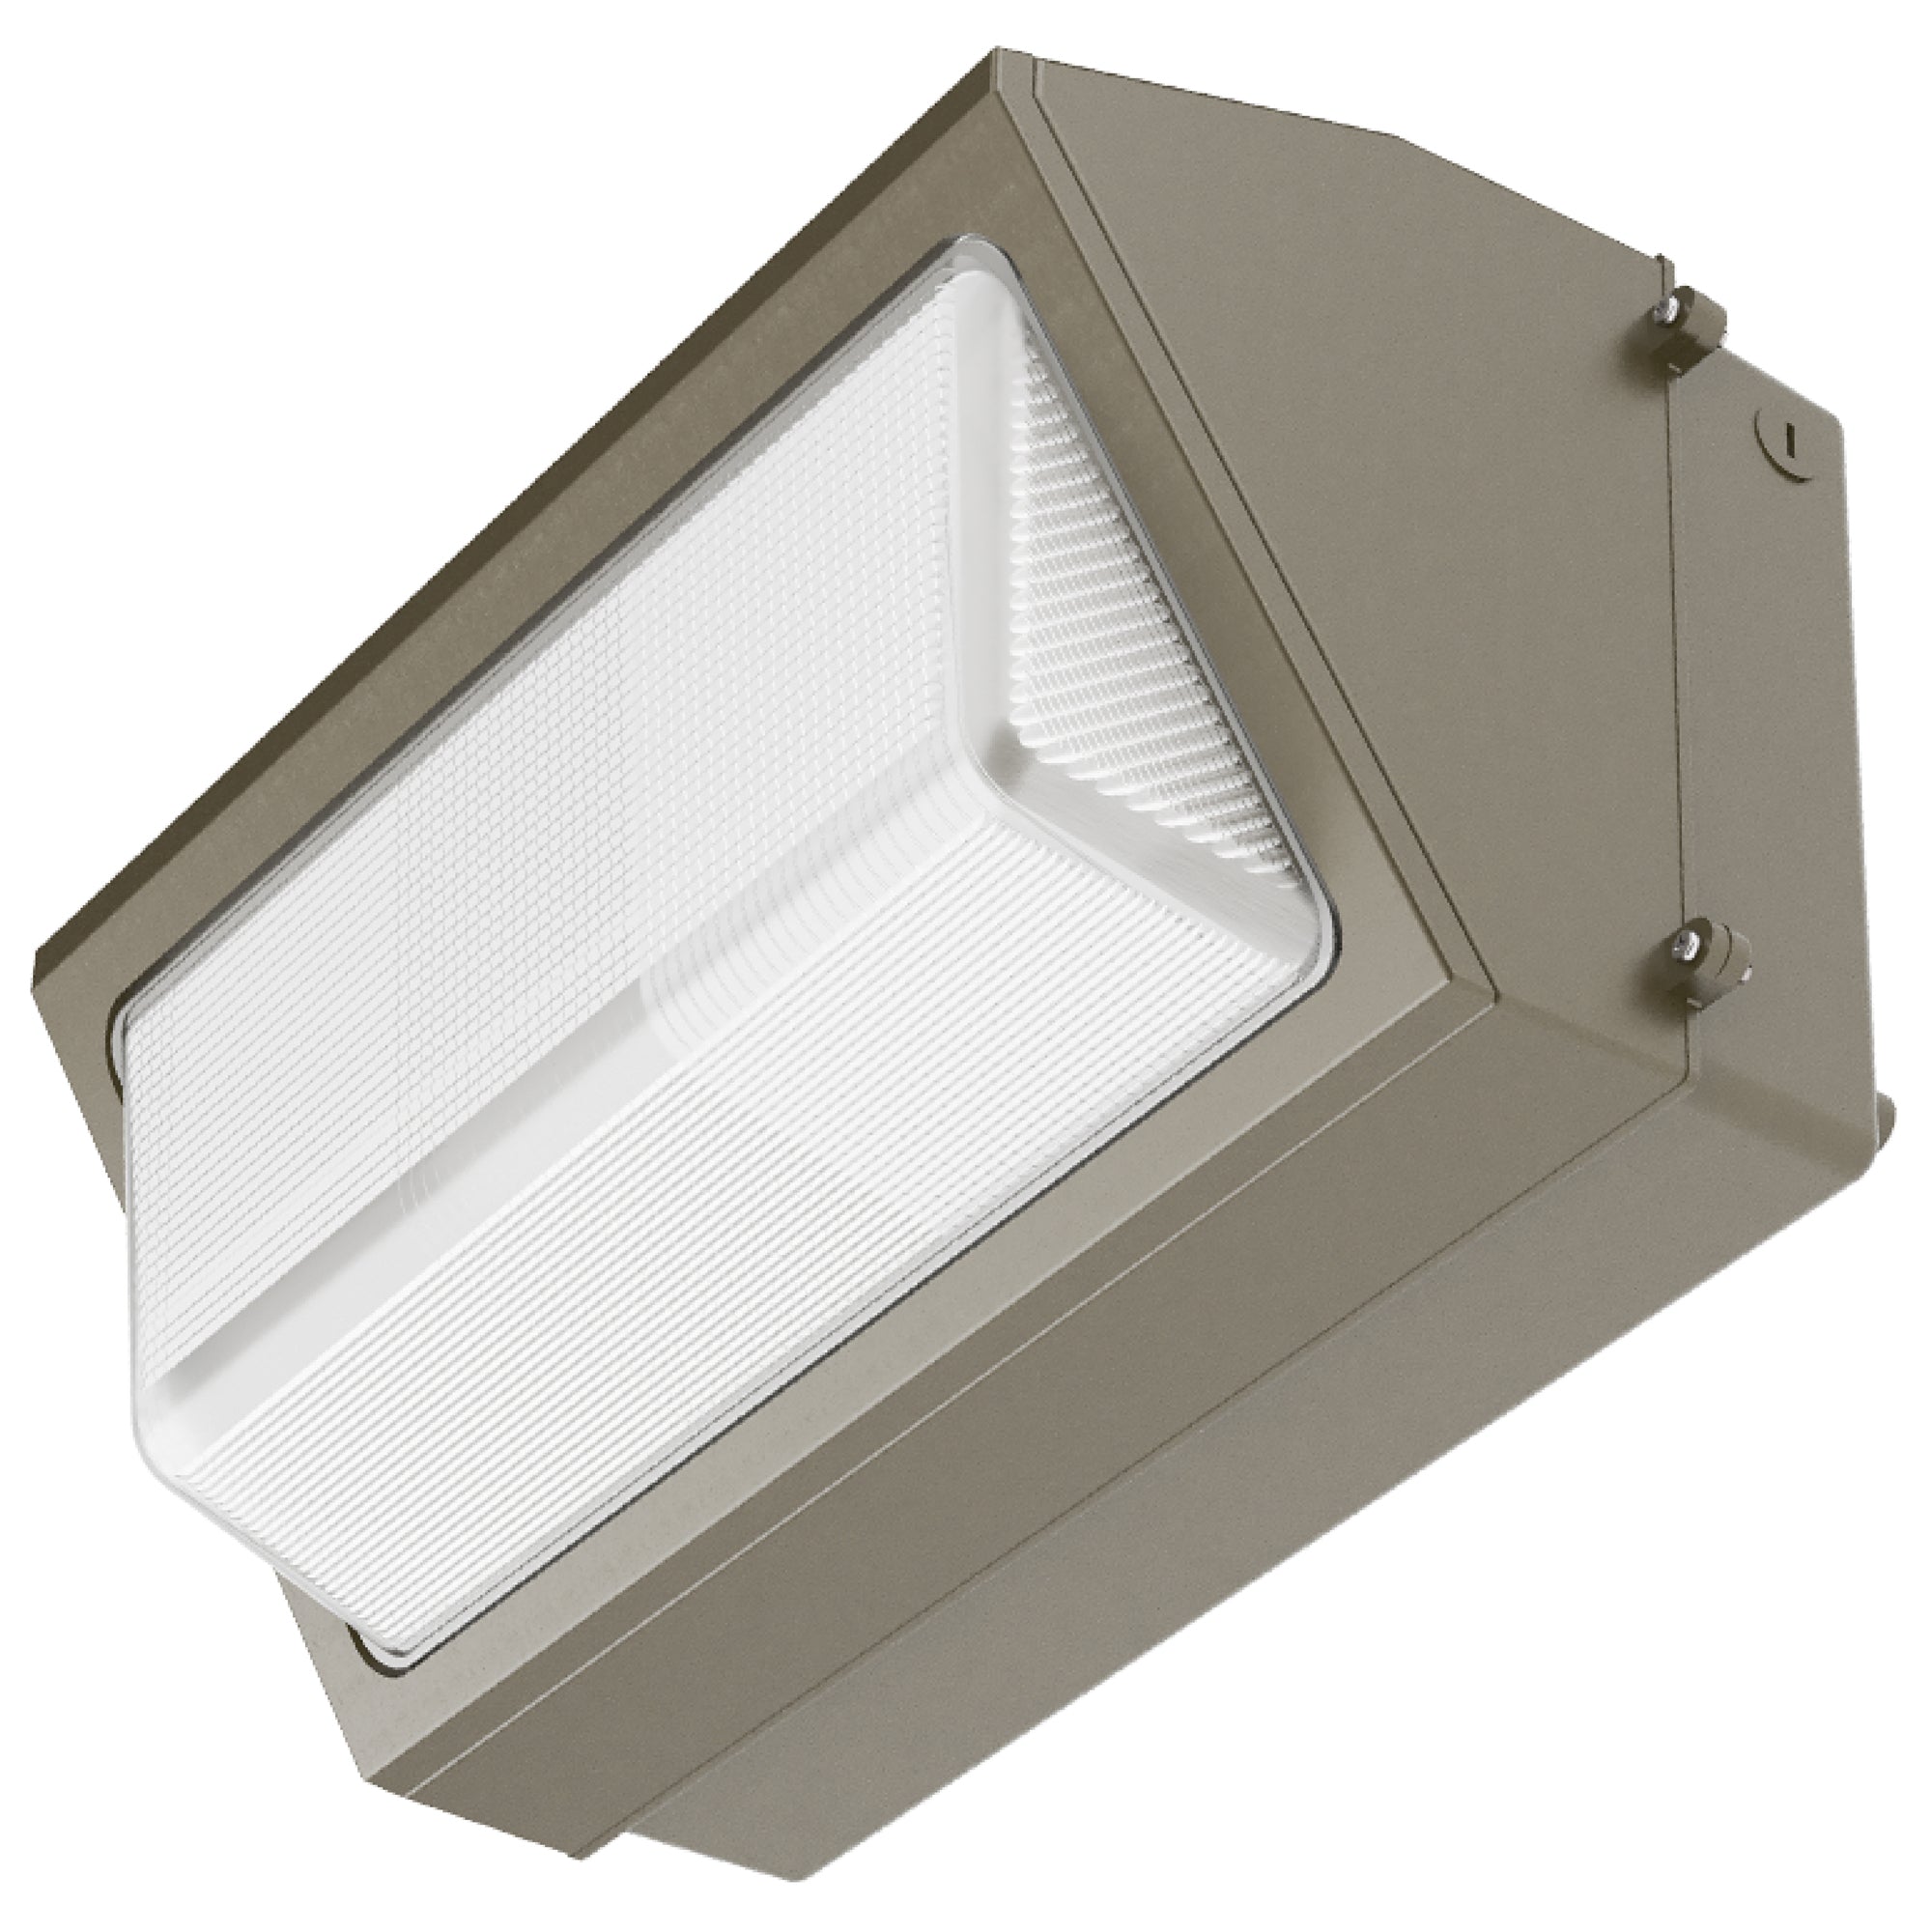 Sunco LED Wall Pack 120W features a bright 12,000 lumens of light for security or exterior flood lights on your warehouse, work place, parking lot, garage, walkway or alley. Wet rated, it is suitable for exterior lighting applications. Provides a long-lasting, bright light outside and can withstand temperatures down to 4-degrees Fahrenheit. Has a 50,000 hour lifespan and is backed by a 10-year warranty.